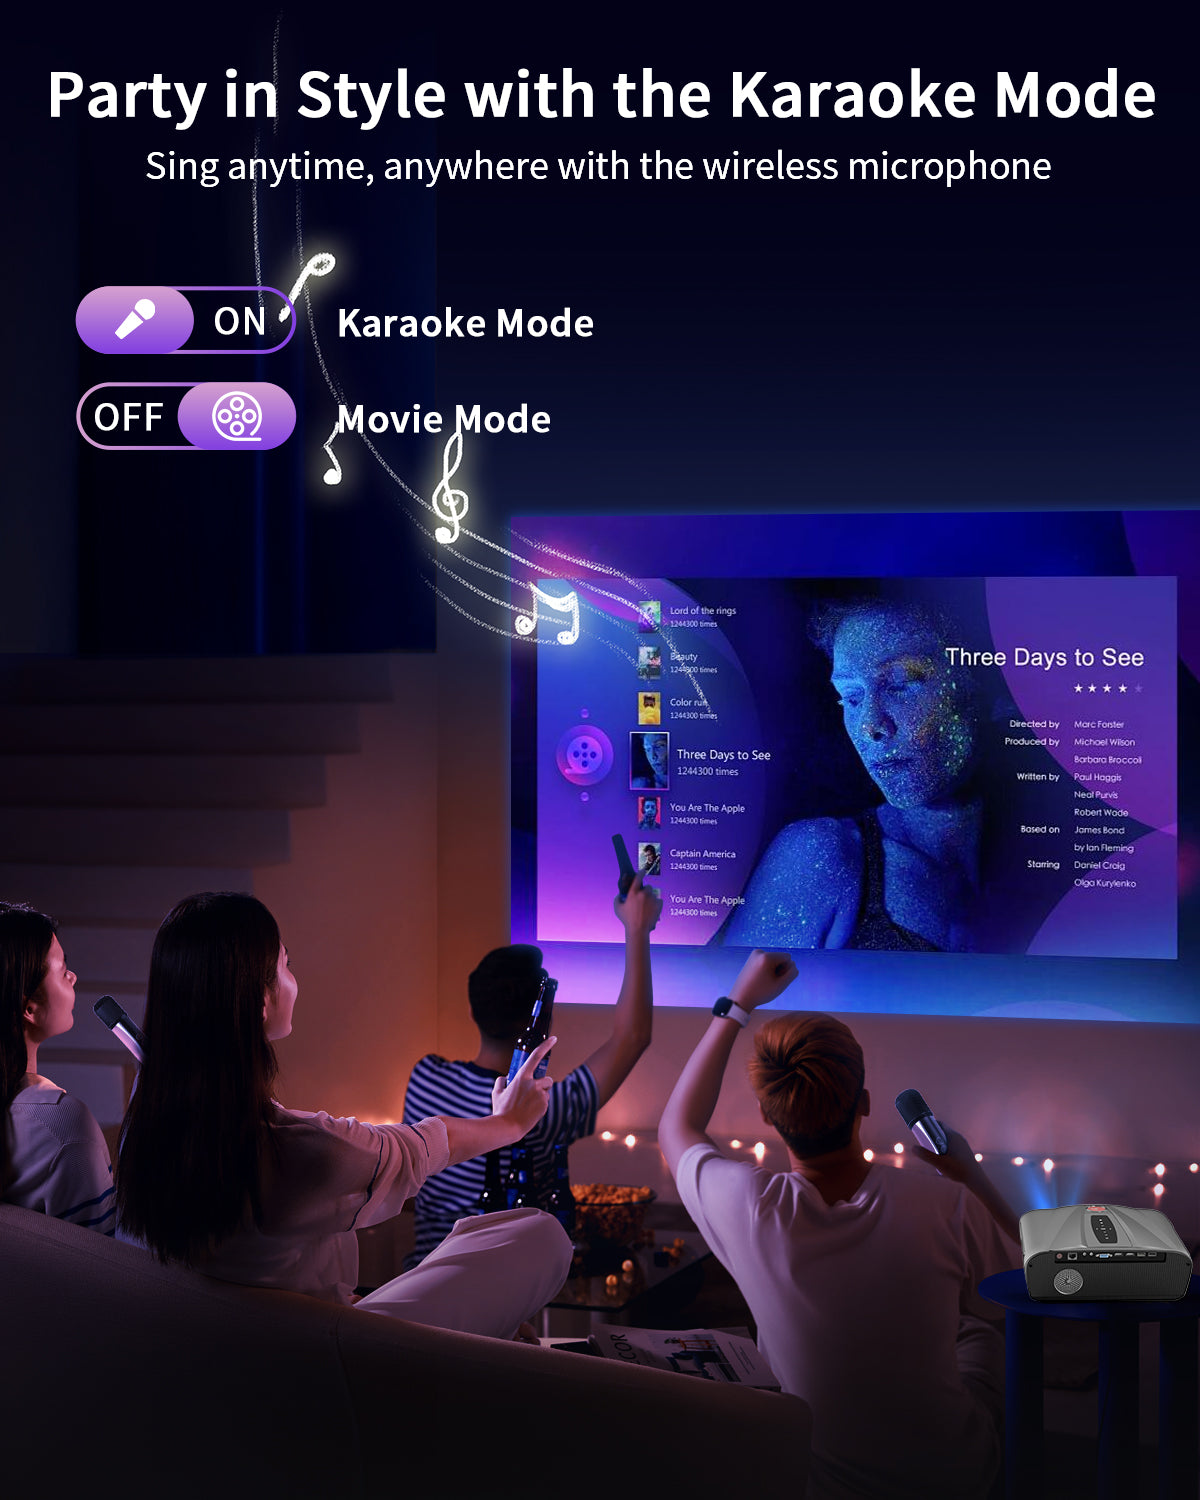 Auto Focus 4K Projector Daytime Karaoke Projectors with Wireless Microphone, 1200ANSI, Built-in Apps 5G WiFi Bluetooth Smart TV Proyector 1080P Full HD WLAN HDMI ARC USB, Ceiling Mount